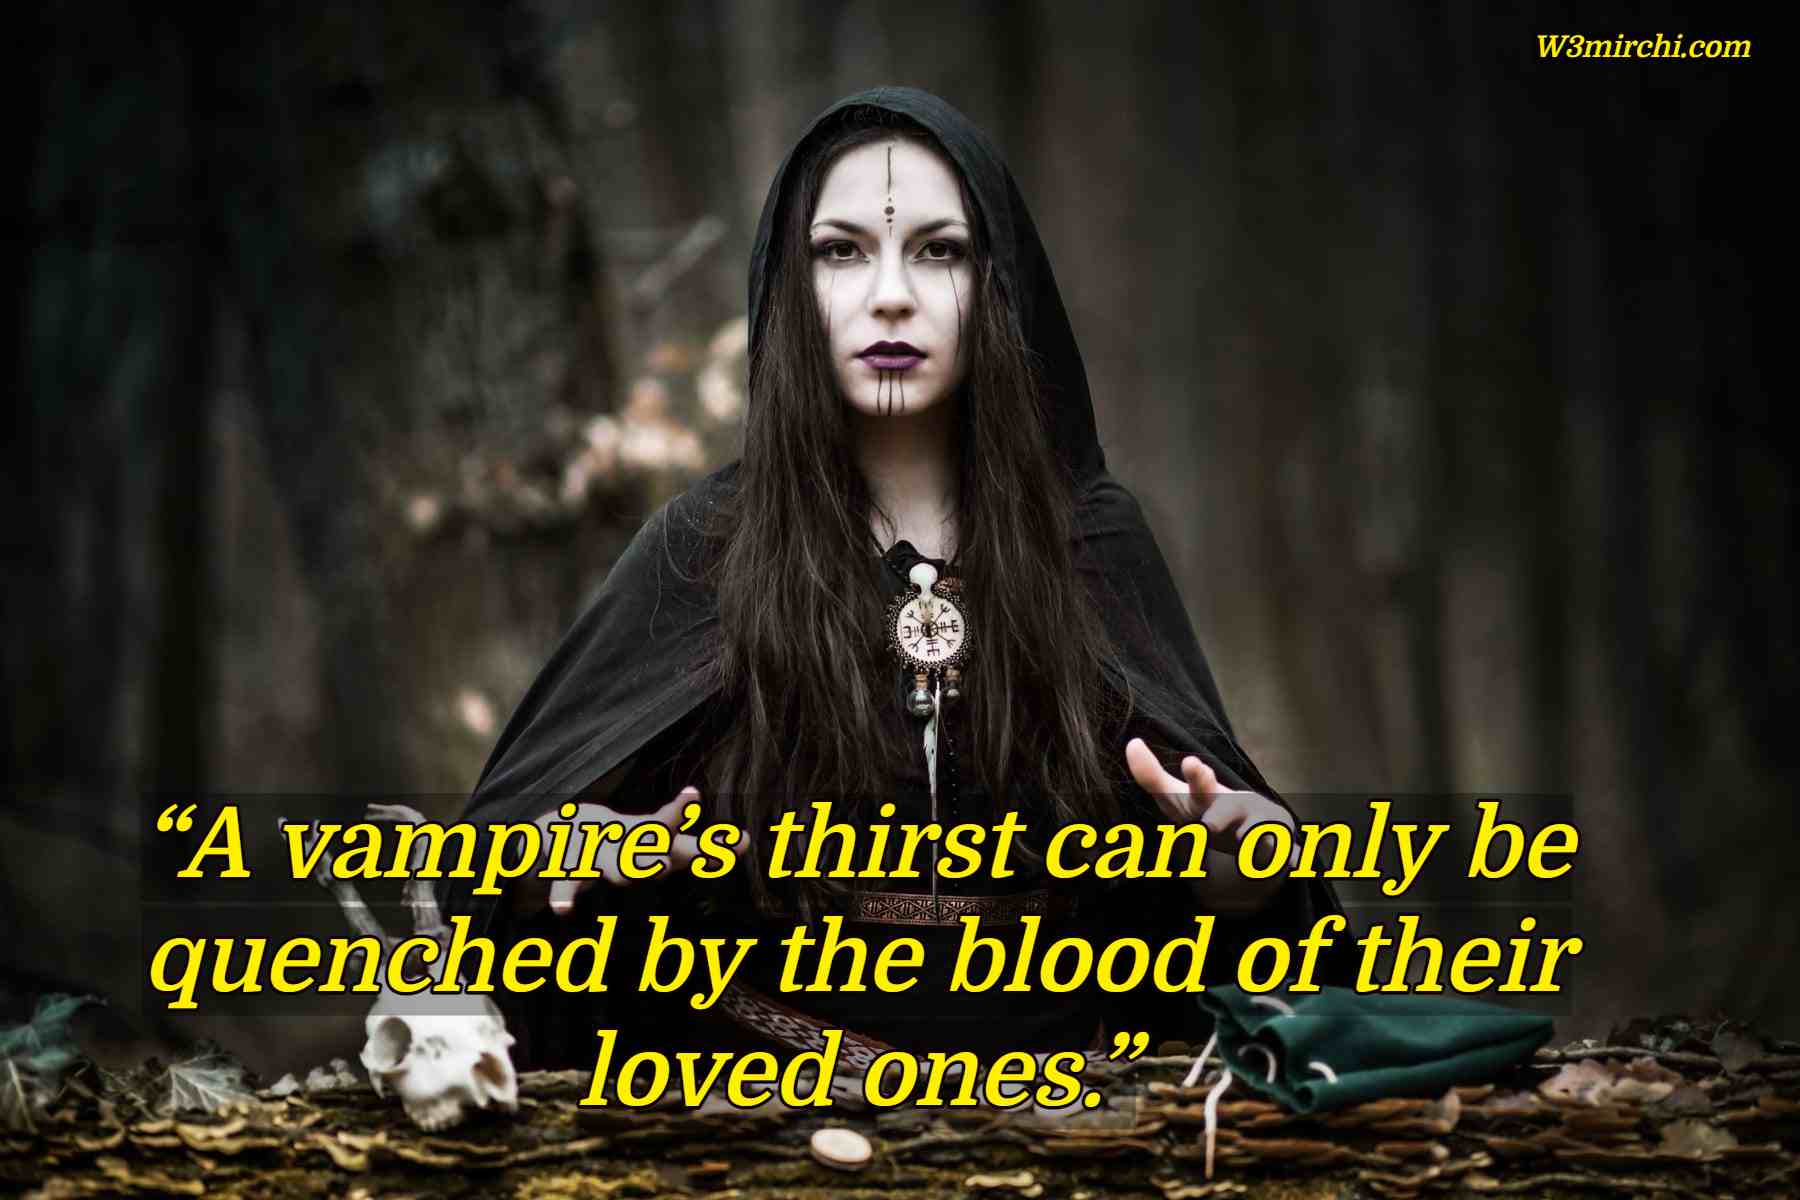 “A vampire’s thirst can only